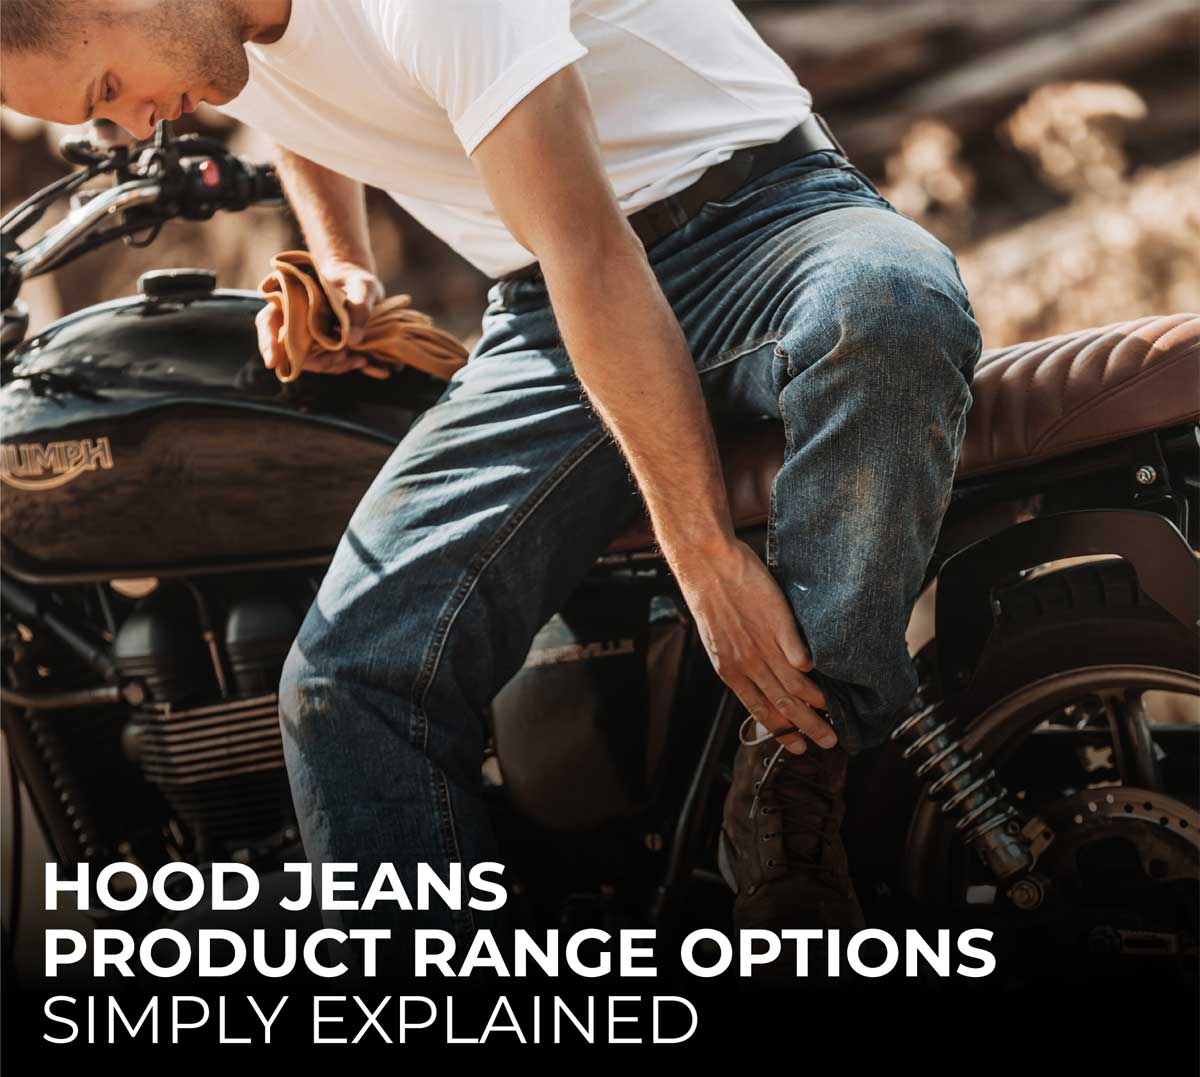 Single Layer Motorcycle Jeans or Lined: Which is Better?